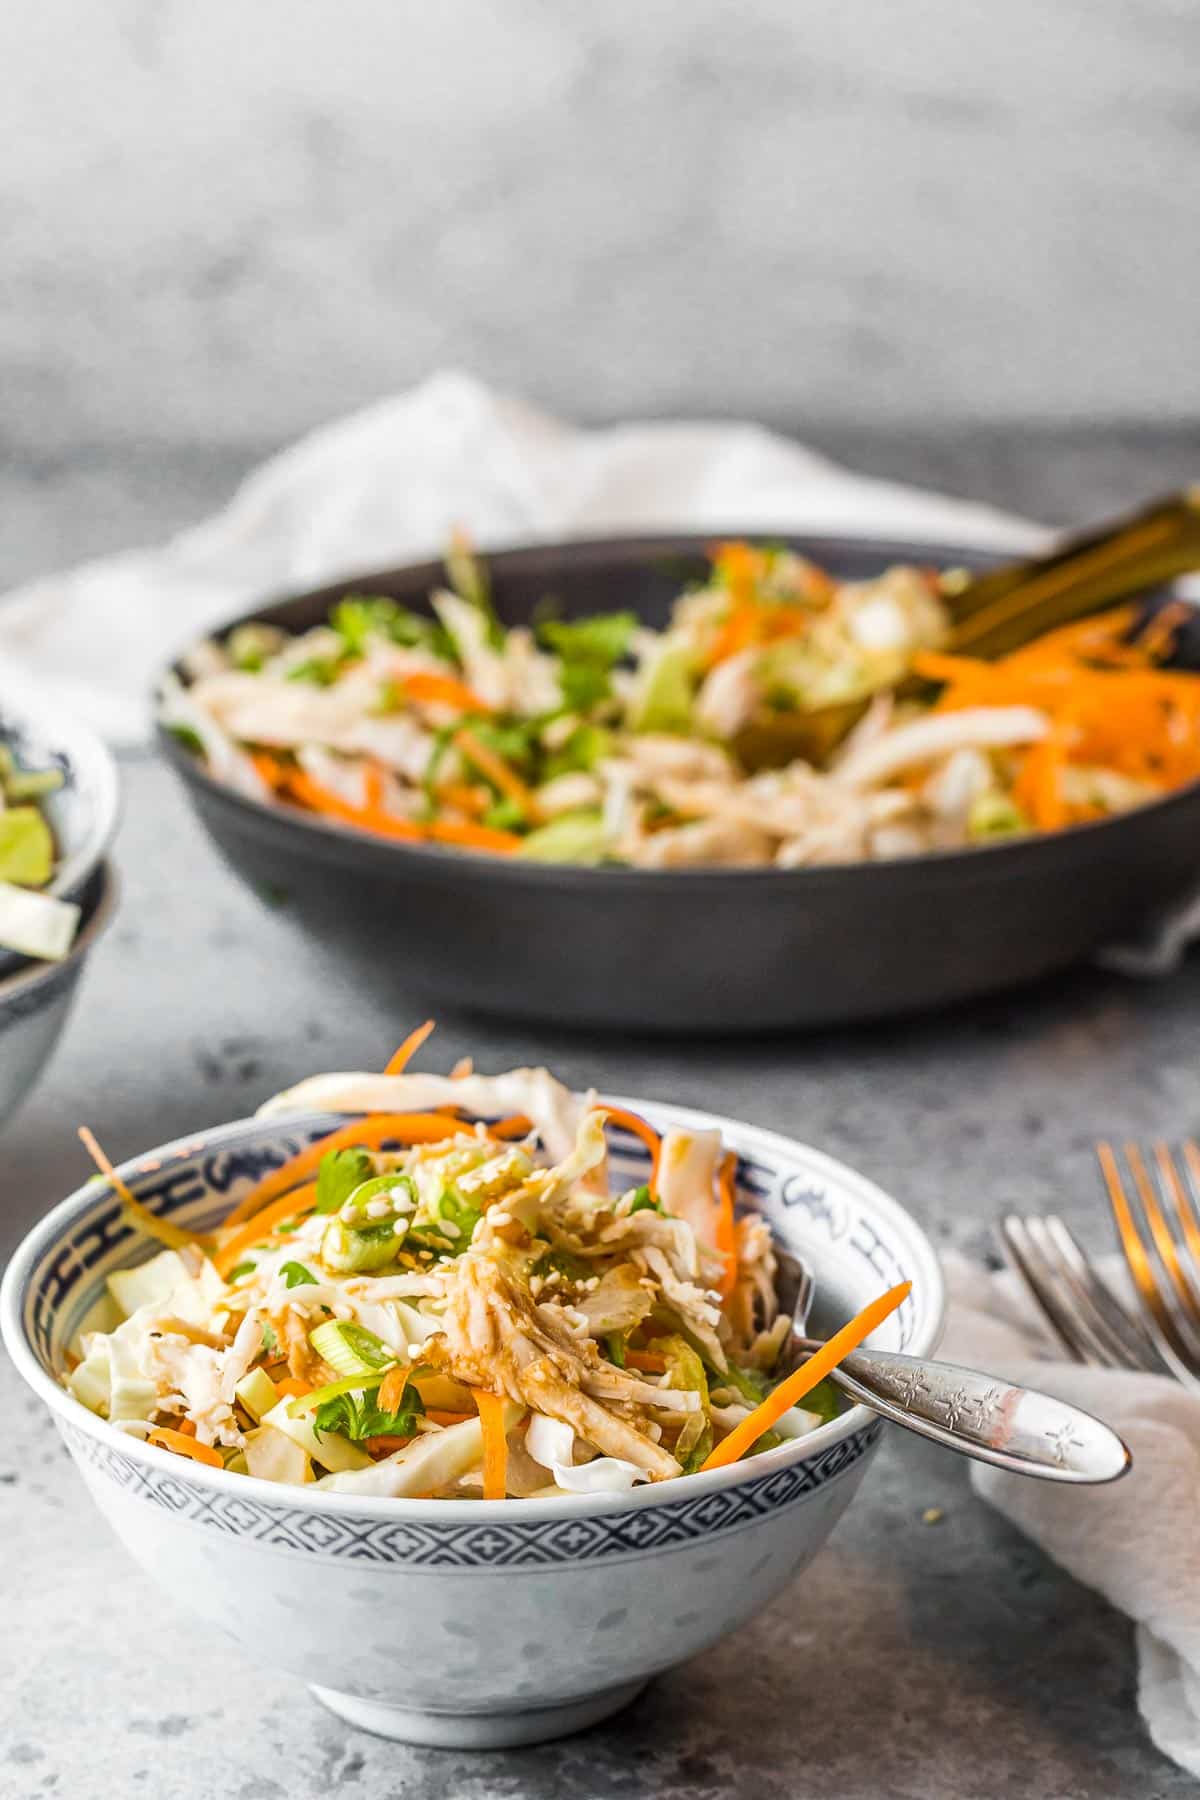 Asian salad in a bowl with fork